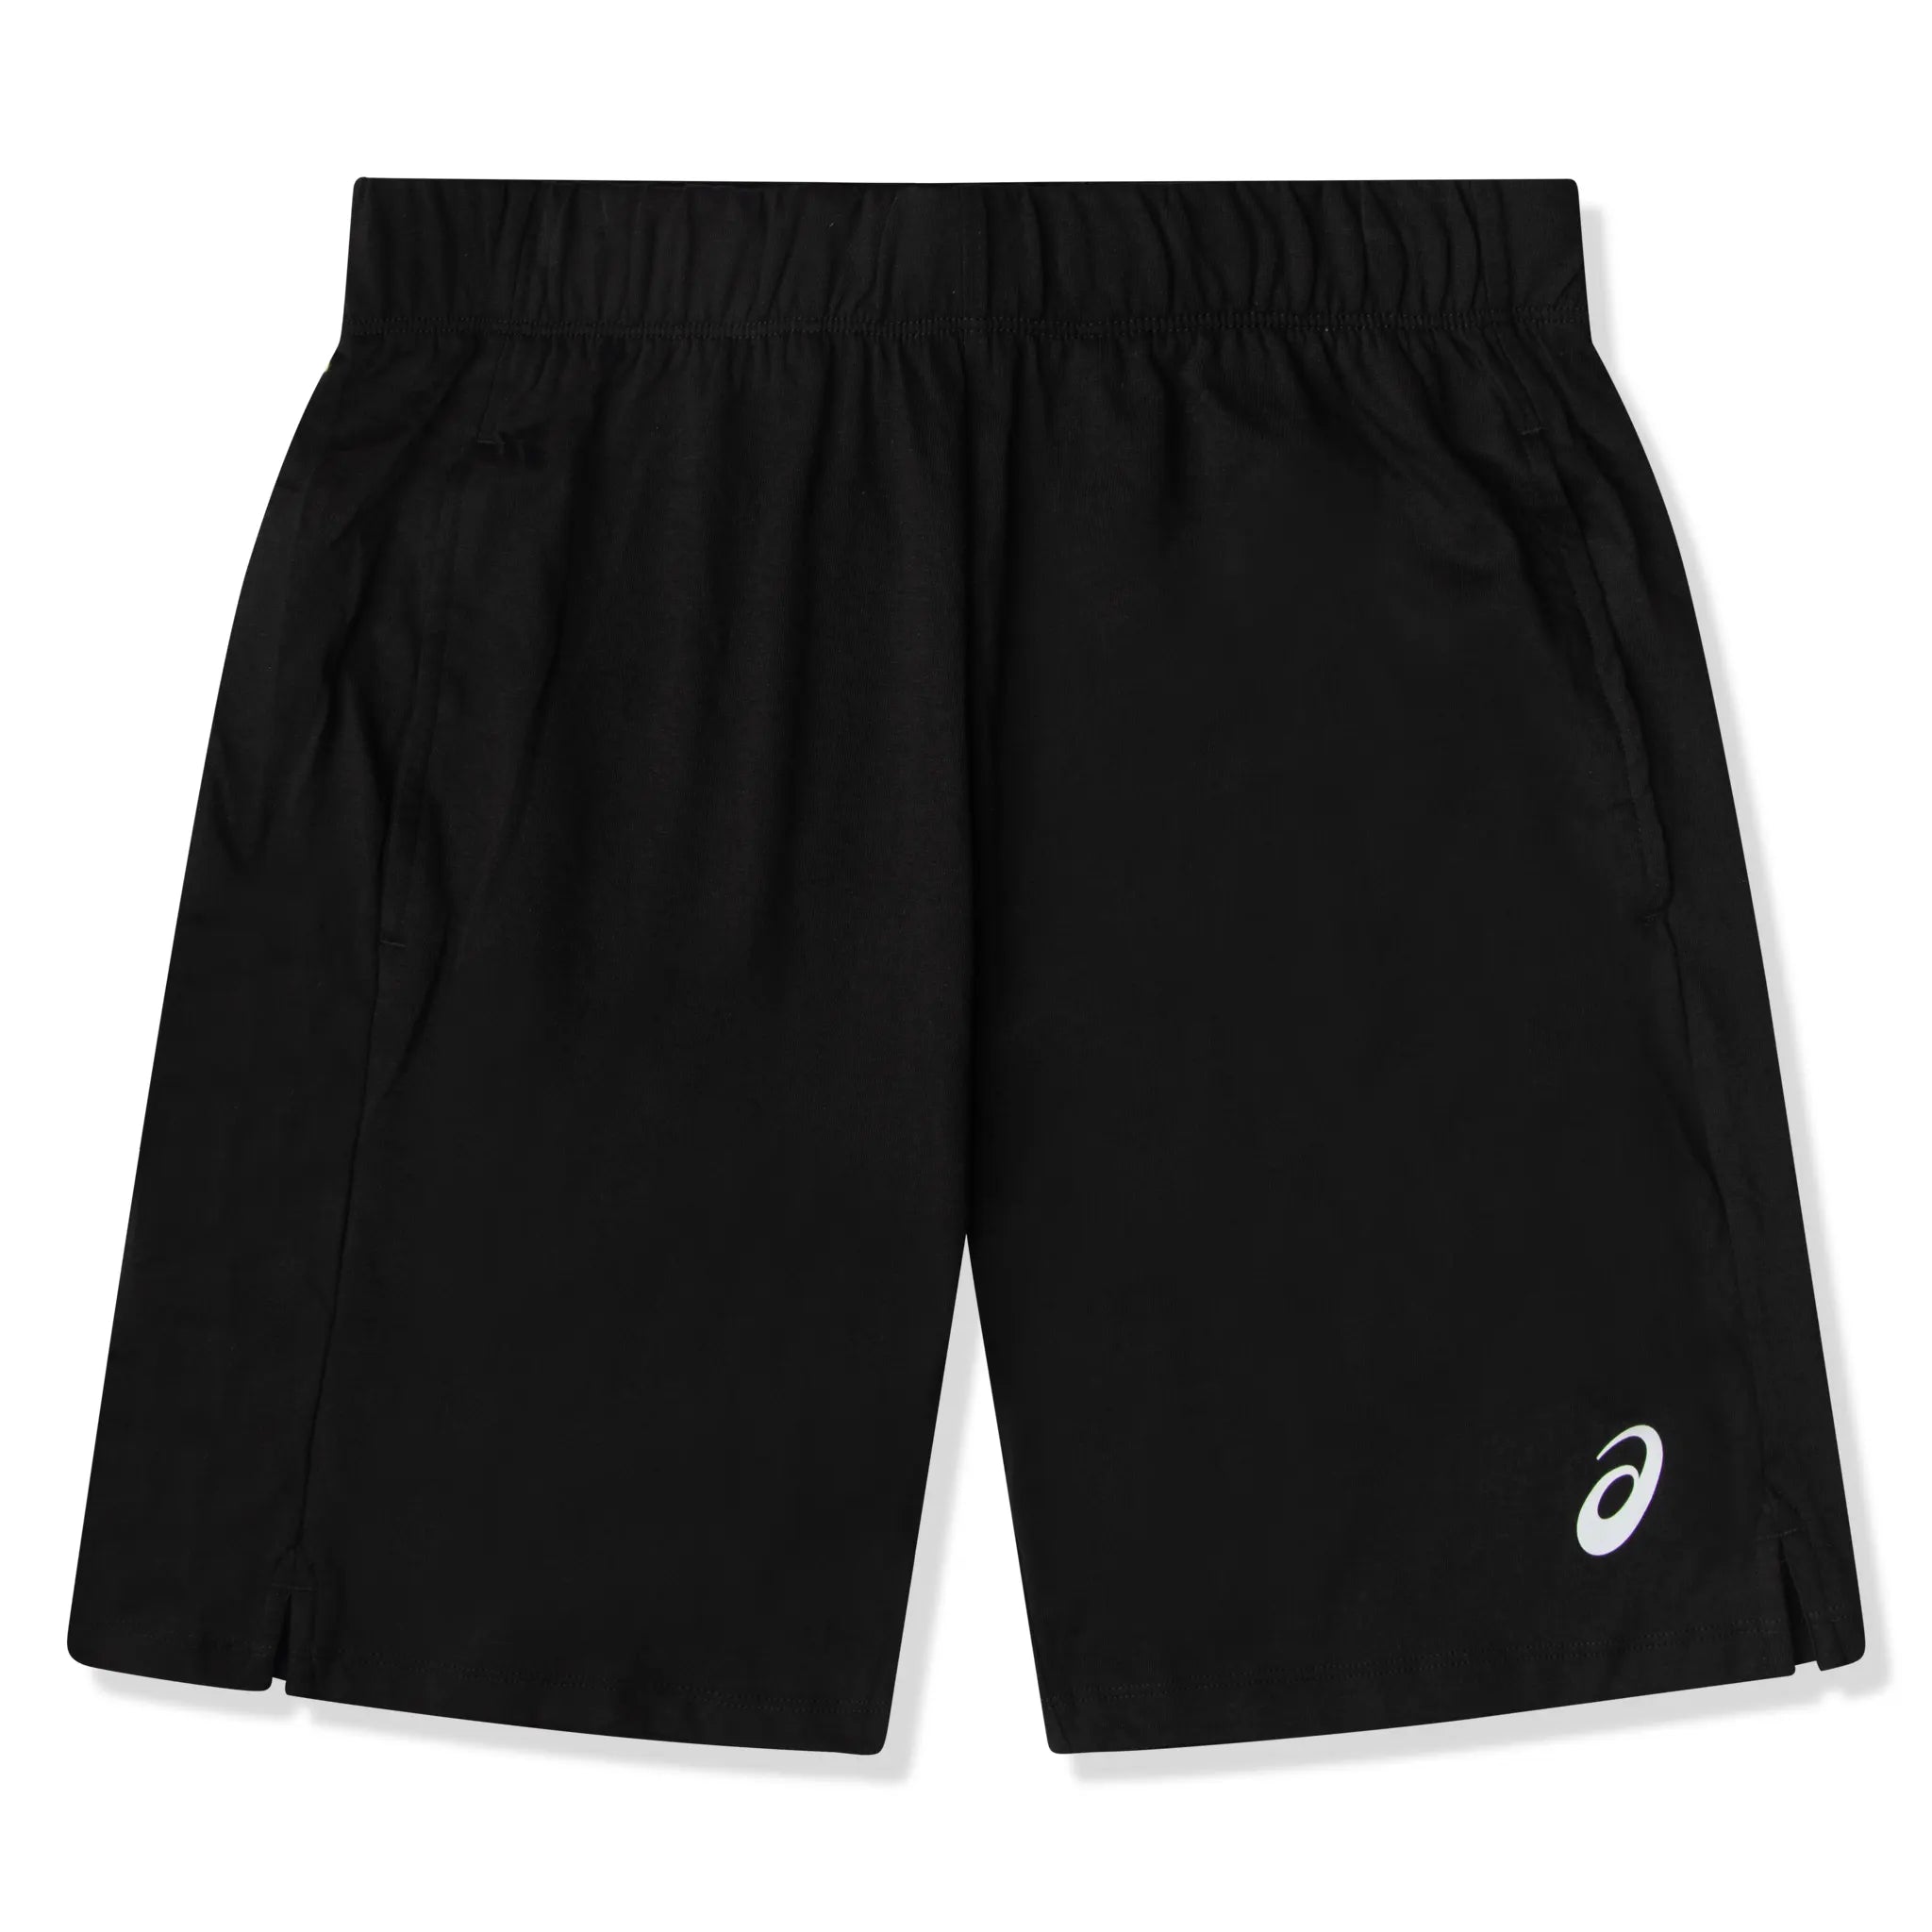 Front view of Asics Fitness and Training Performance Black Shorts 150605-0904